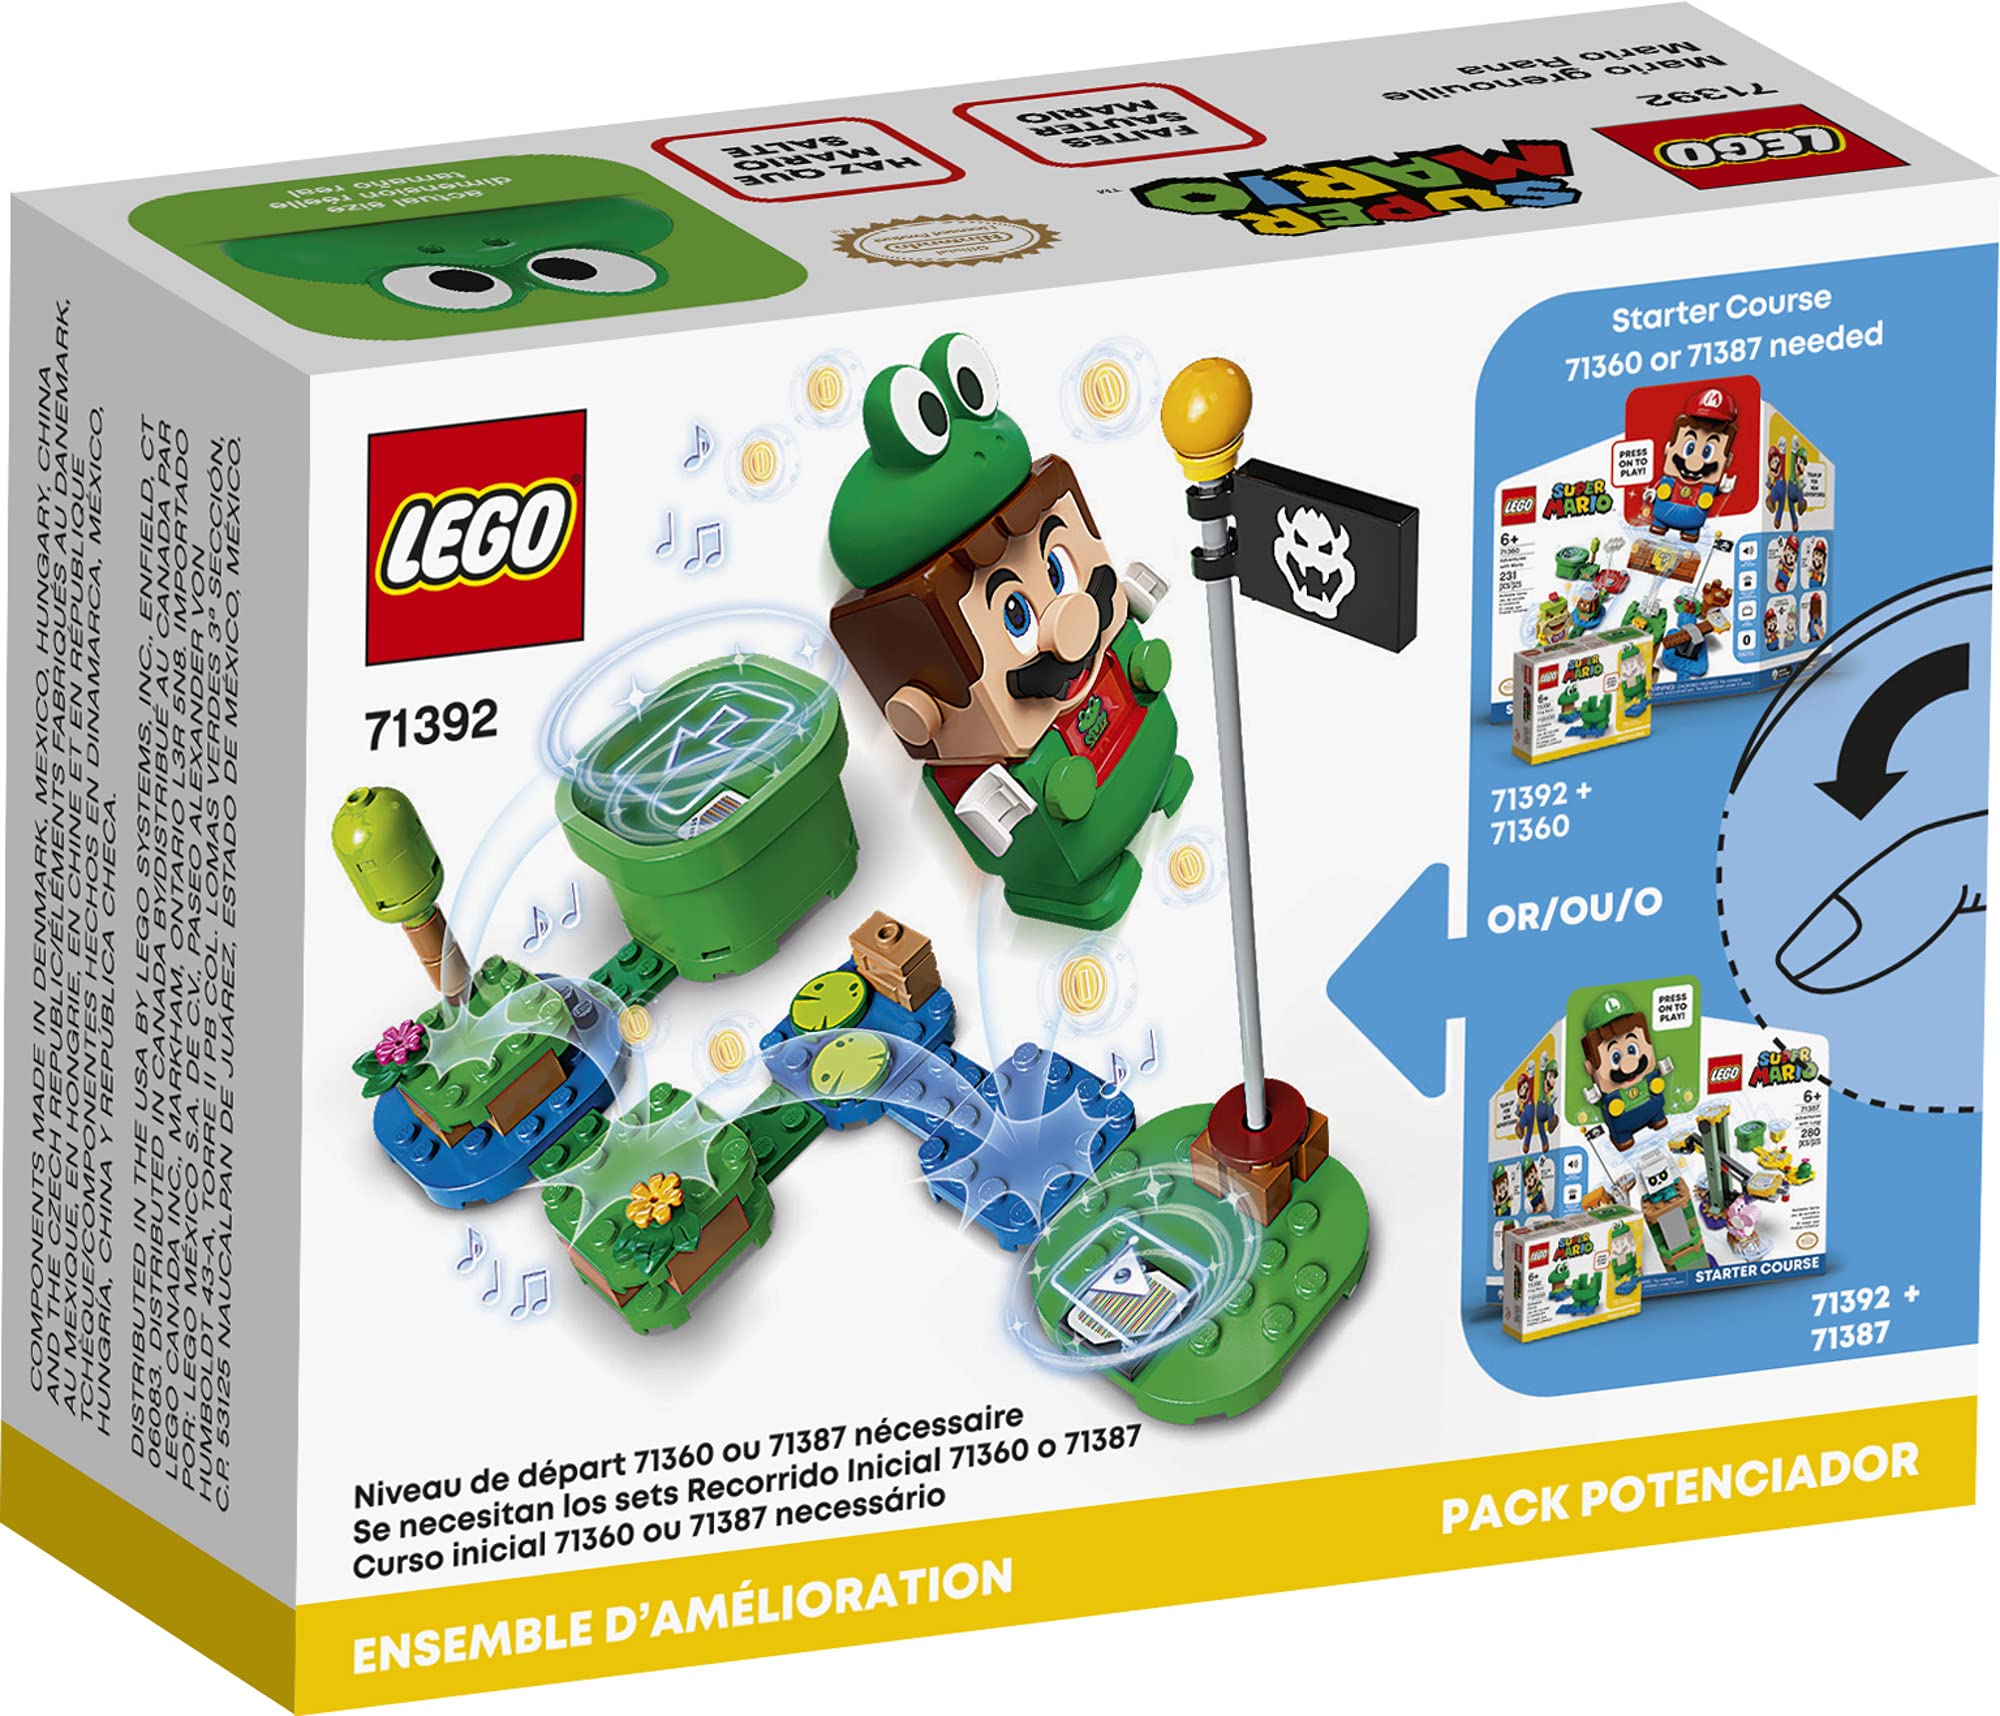 LEGO Super Mario Frog Mario Power-Up Pack 71392 Building Kit; Collectible Gift Toy for Creative Kids; New 2021 (11 Pieces)